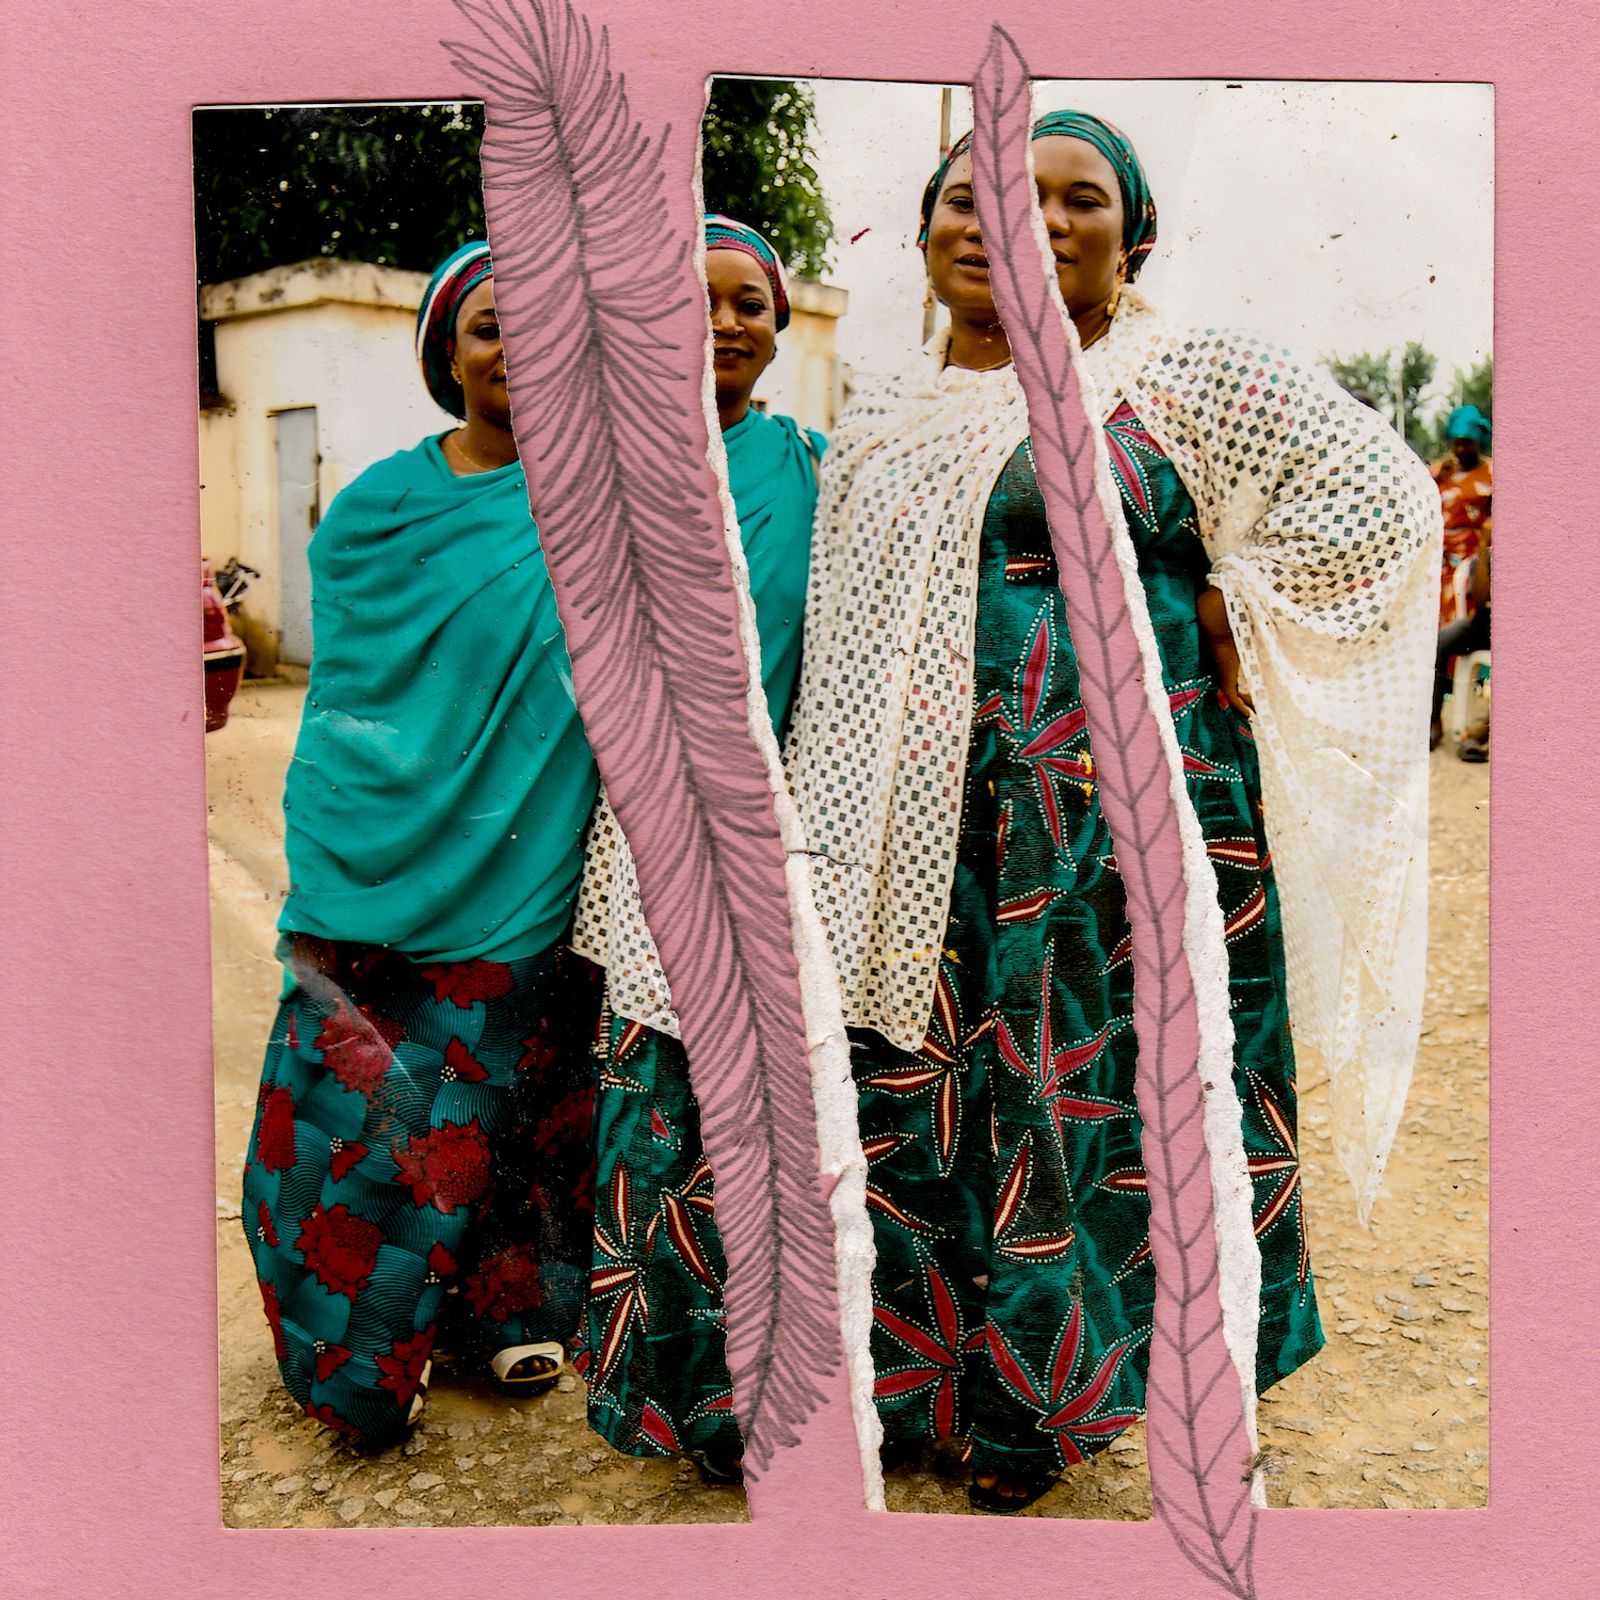 © Rahima Gambo - Image from the A Walk  photography project